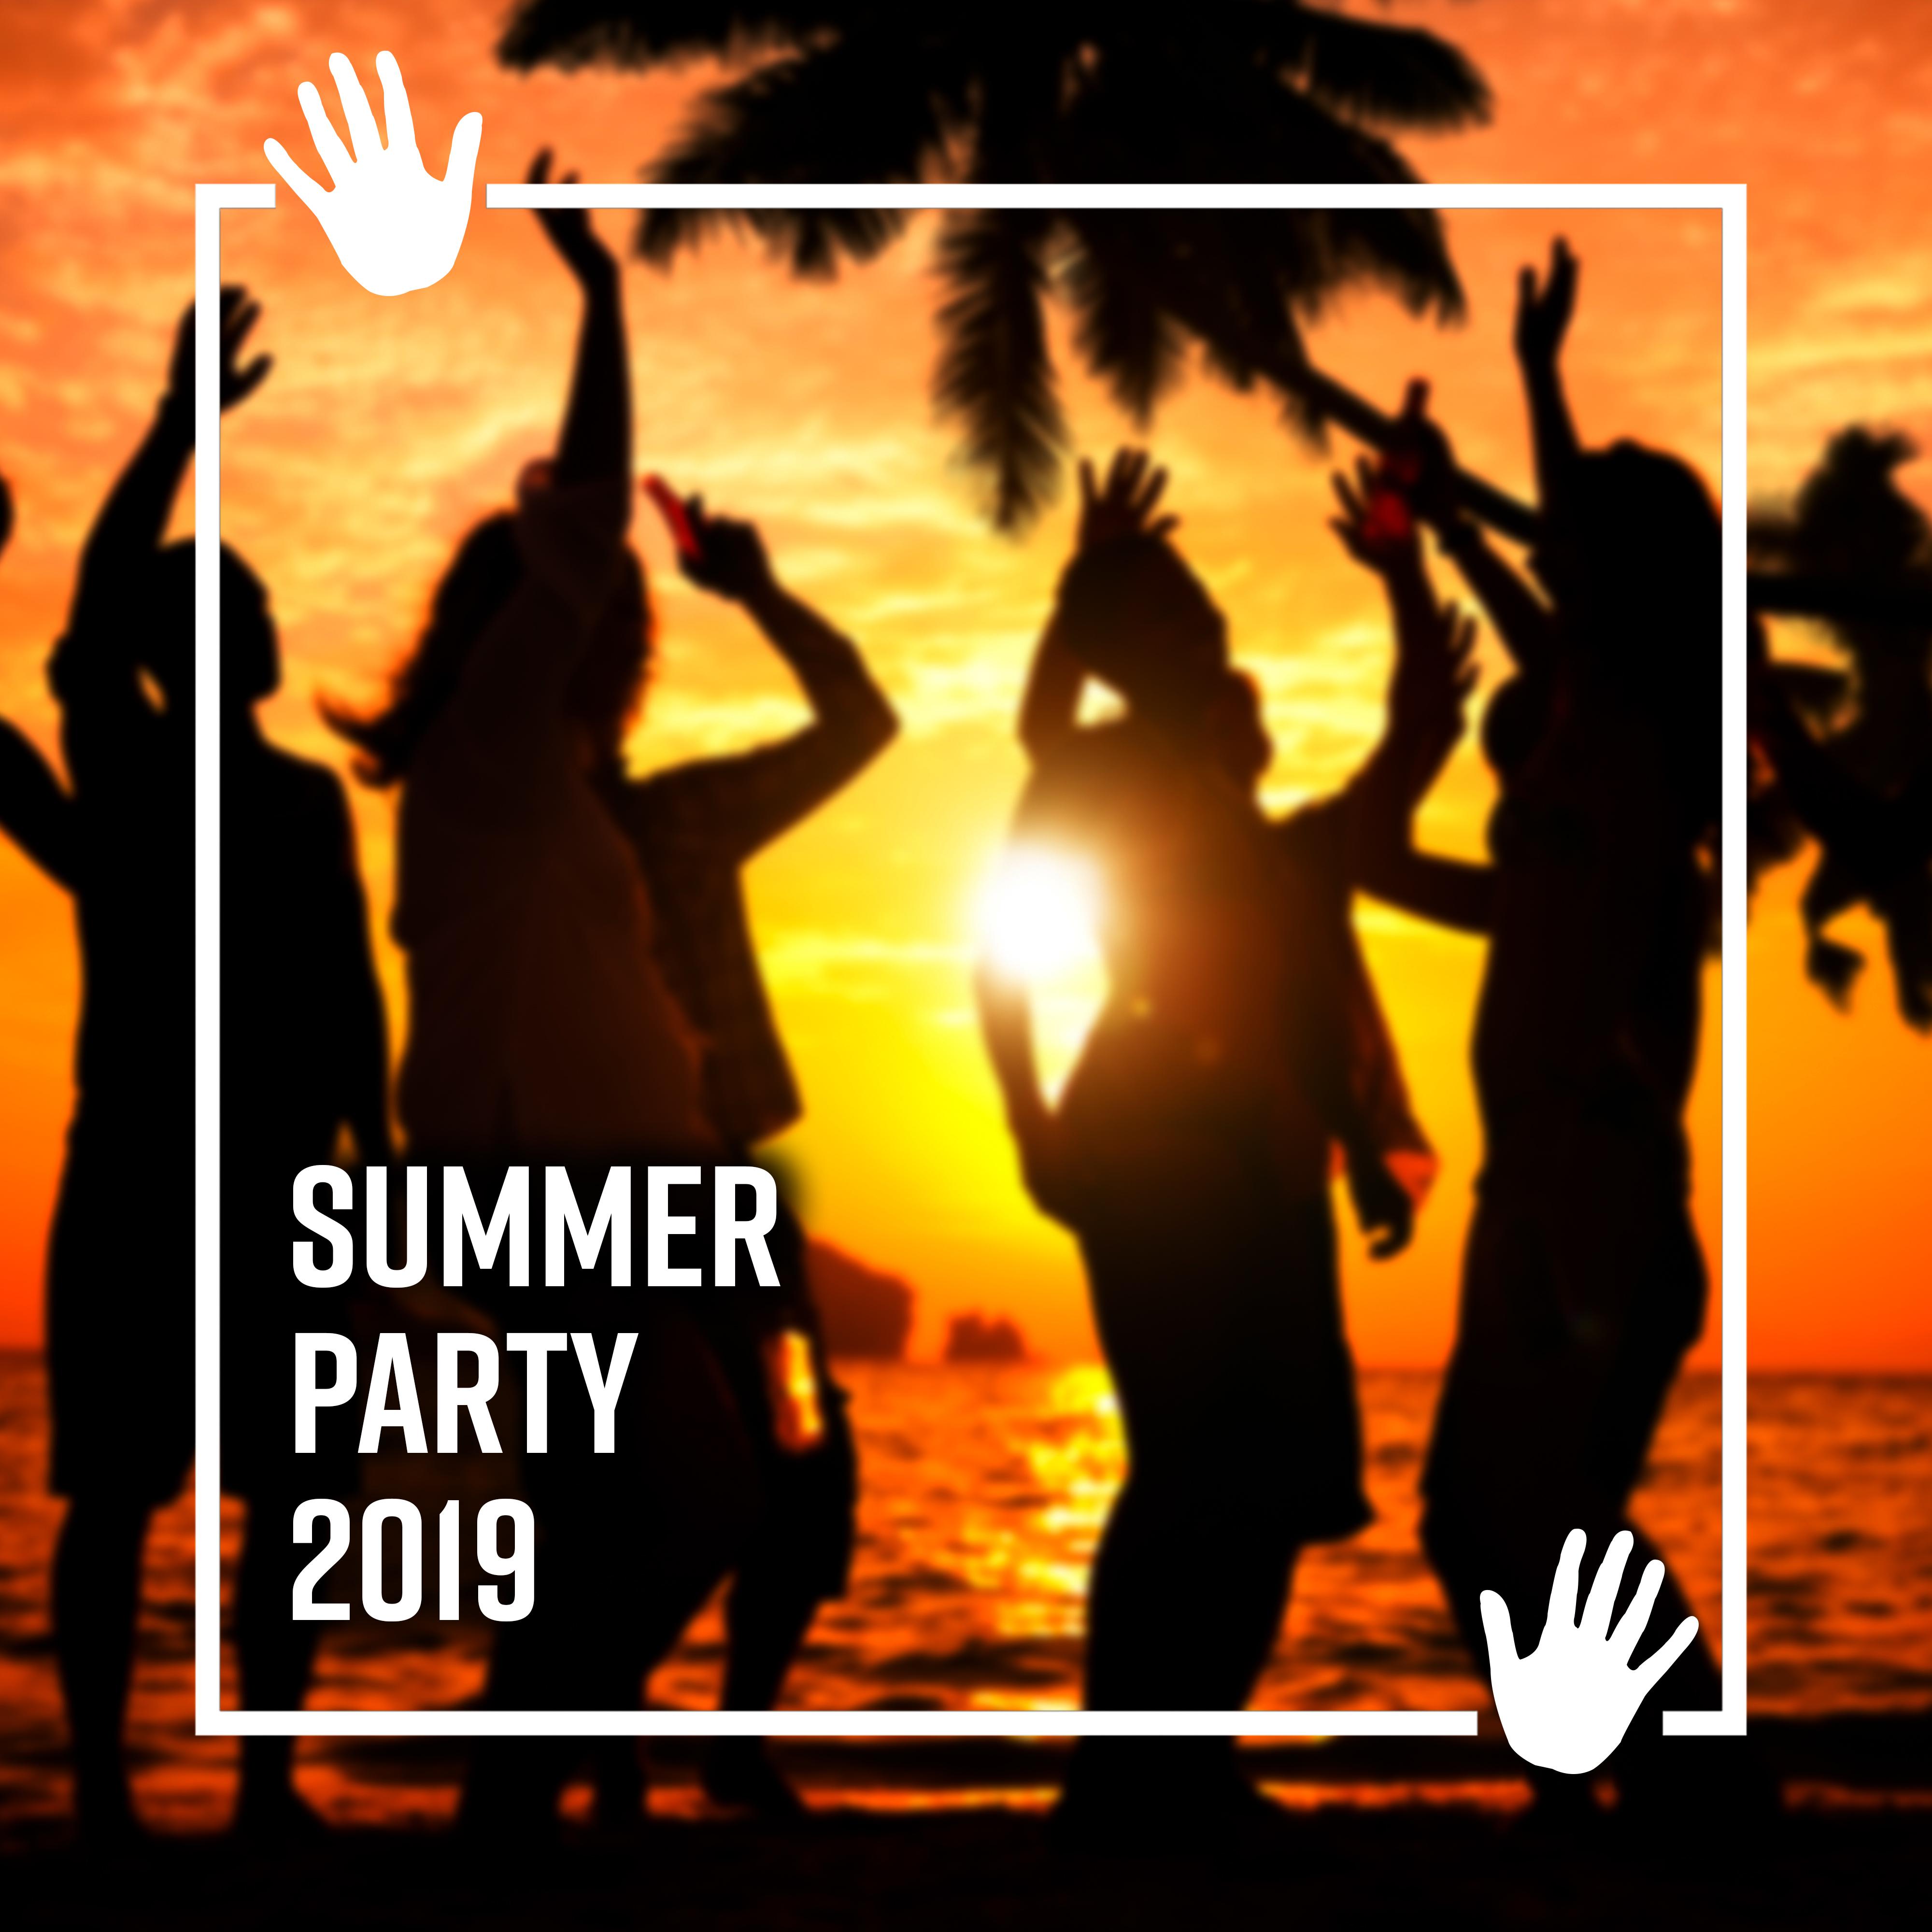 Summer Party 2019 – Ibiza Dance Party, Chill Out 2019, Ibiza Lounge Club, Deep Relax, Summer Hits 2019